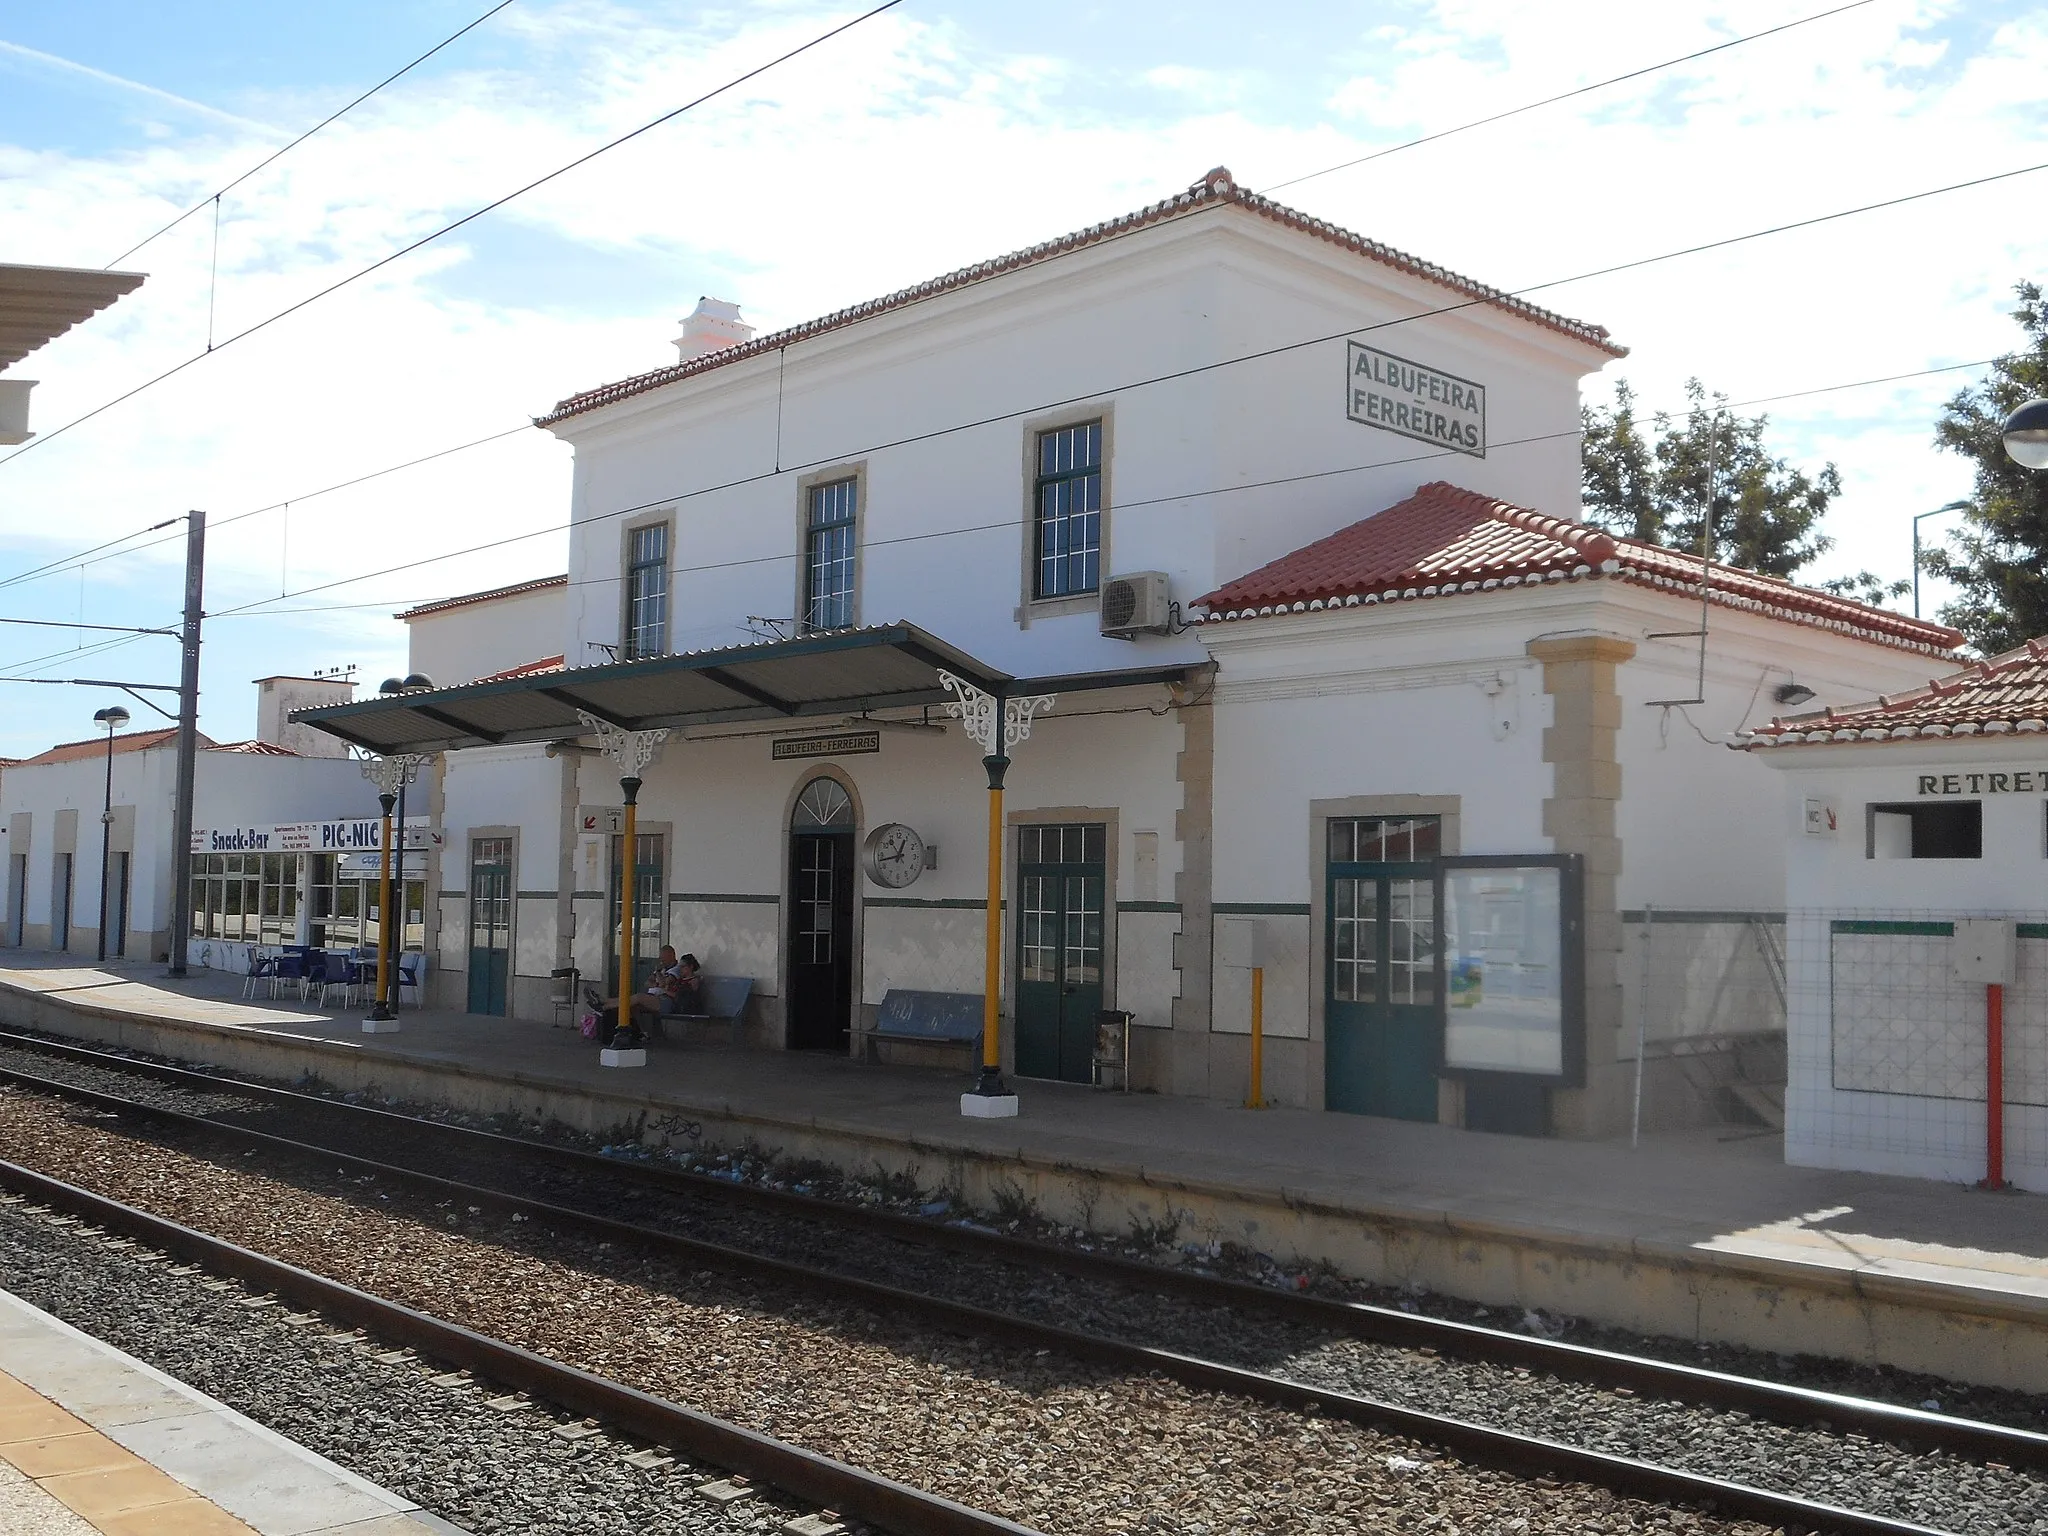 Photo showing: The Albufeira/Ferreira railway station, located in the village of Ferreira, Albufeira, Algarve,Portugal. This view is from the north western side of the railway lines